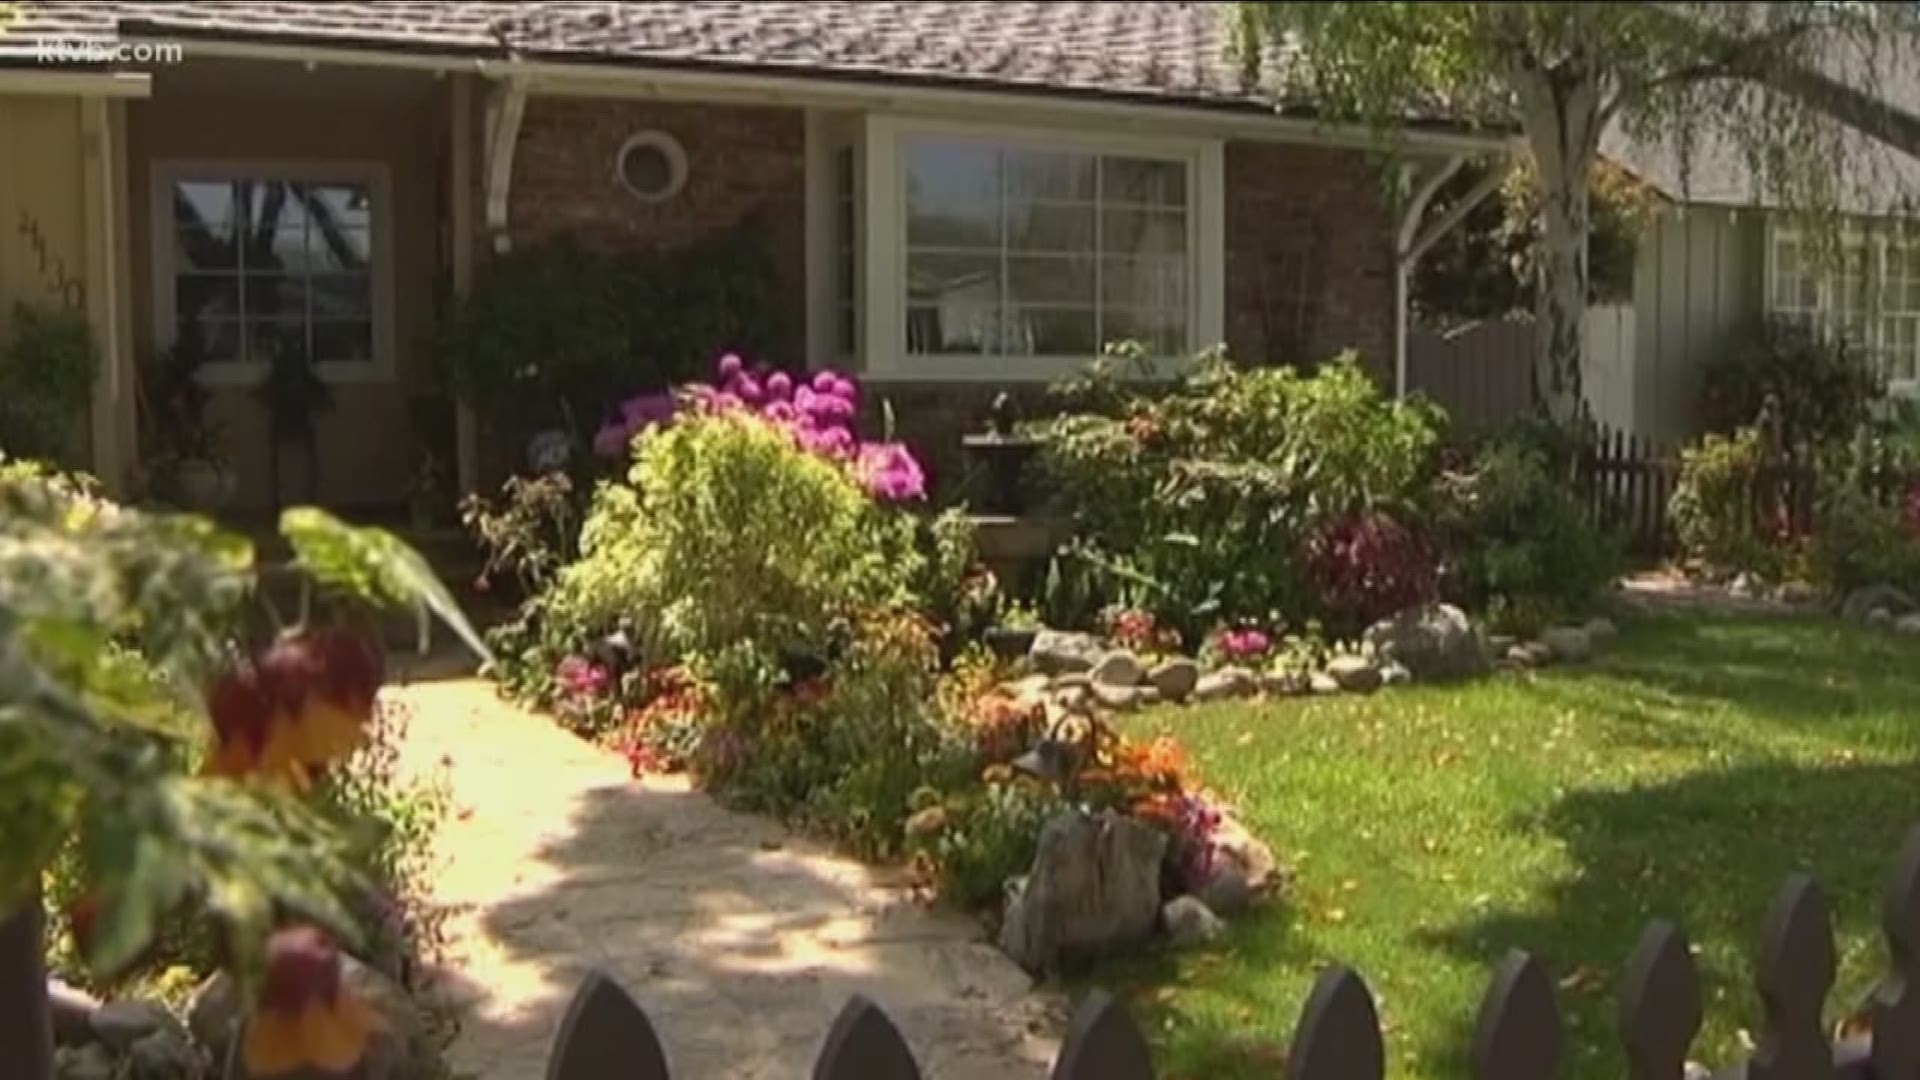 Boise is hoping to improve the affordability of homes in the city, but a realtors's group said the planned regulations are a violation of private property rights.